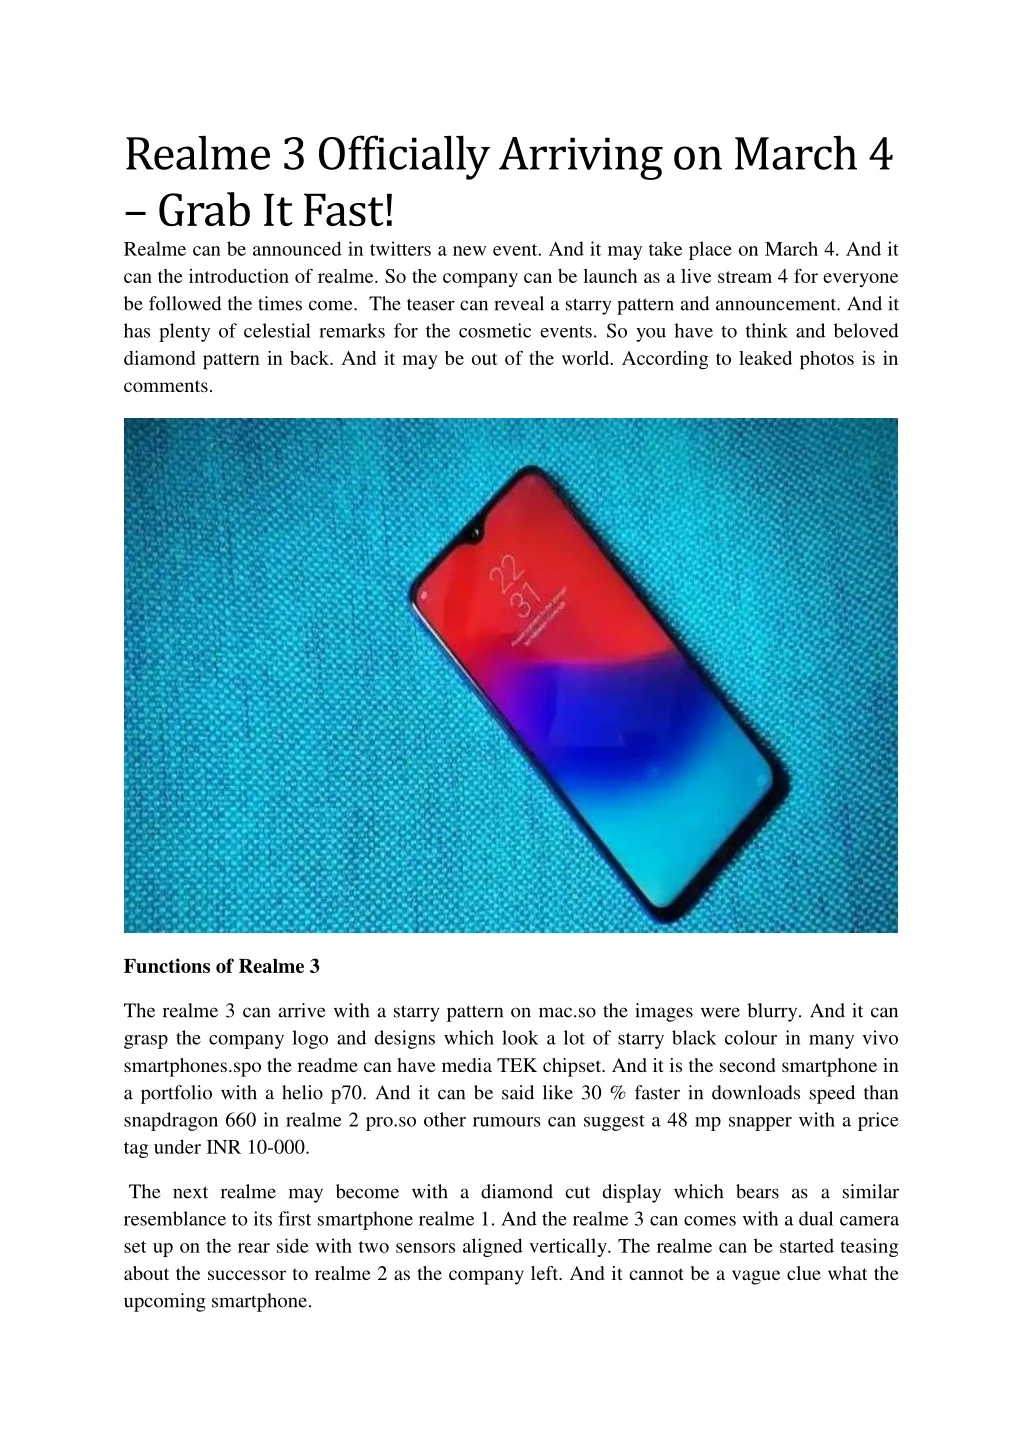 realme 3 officially arriving on march 4 grab